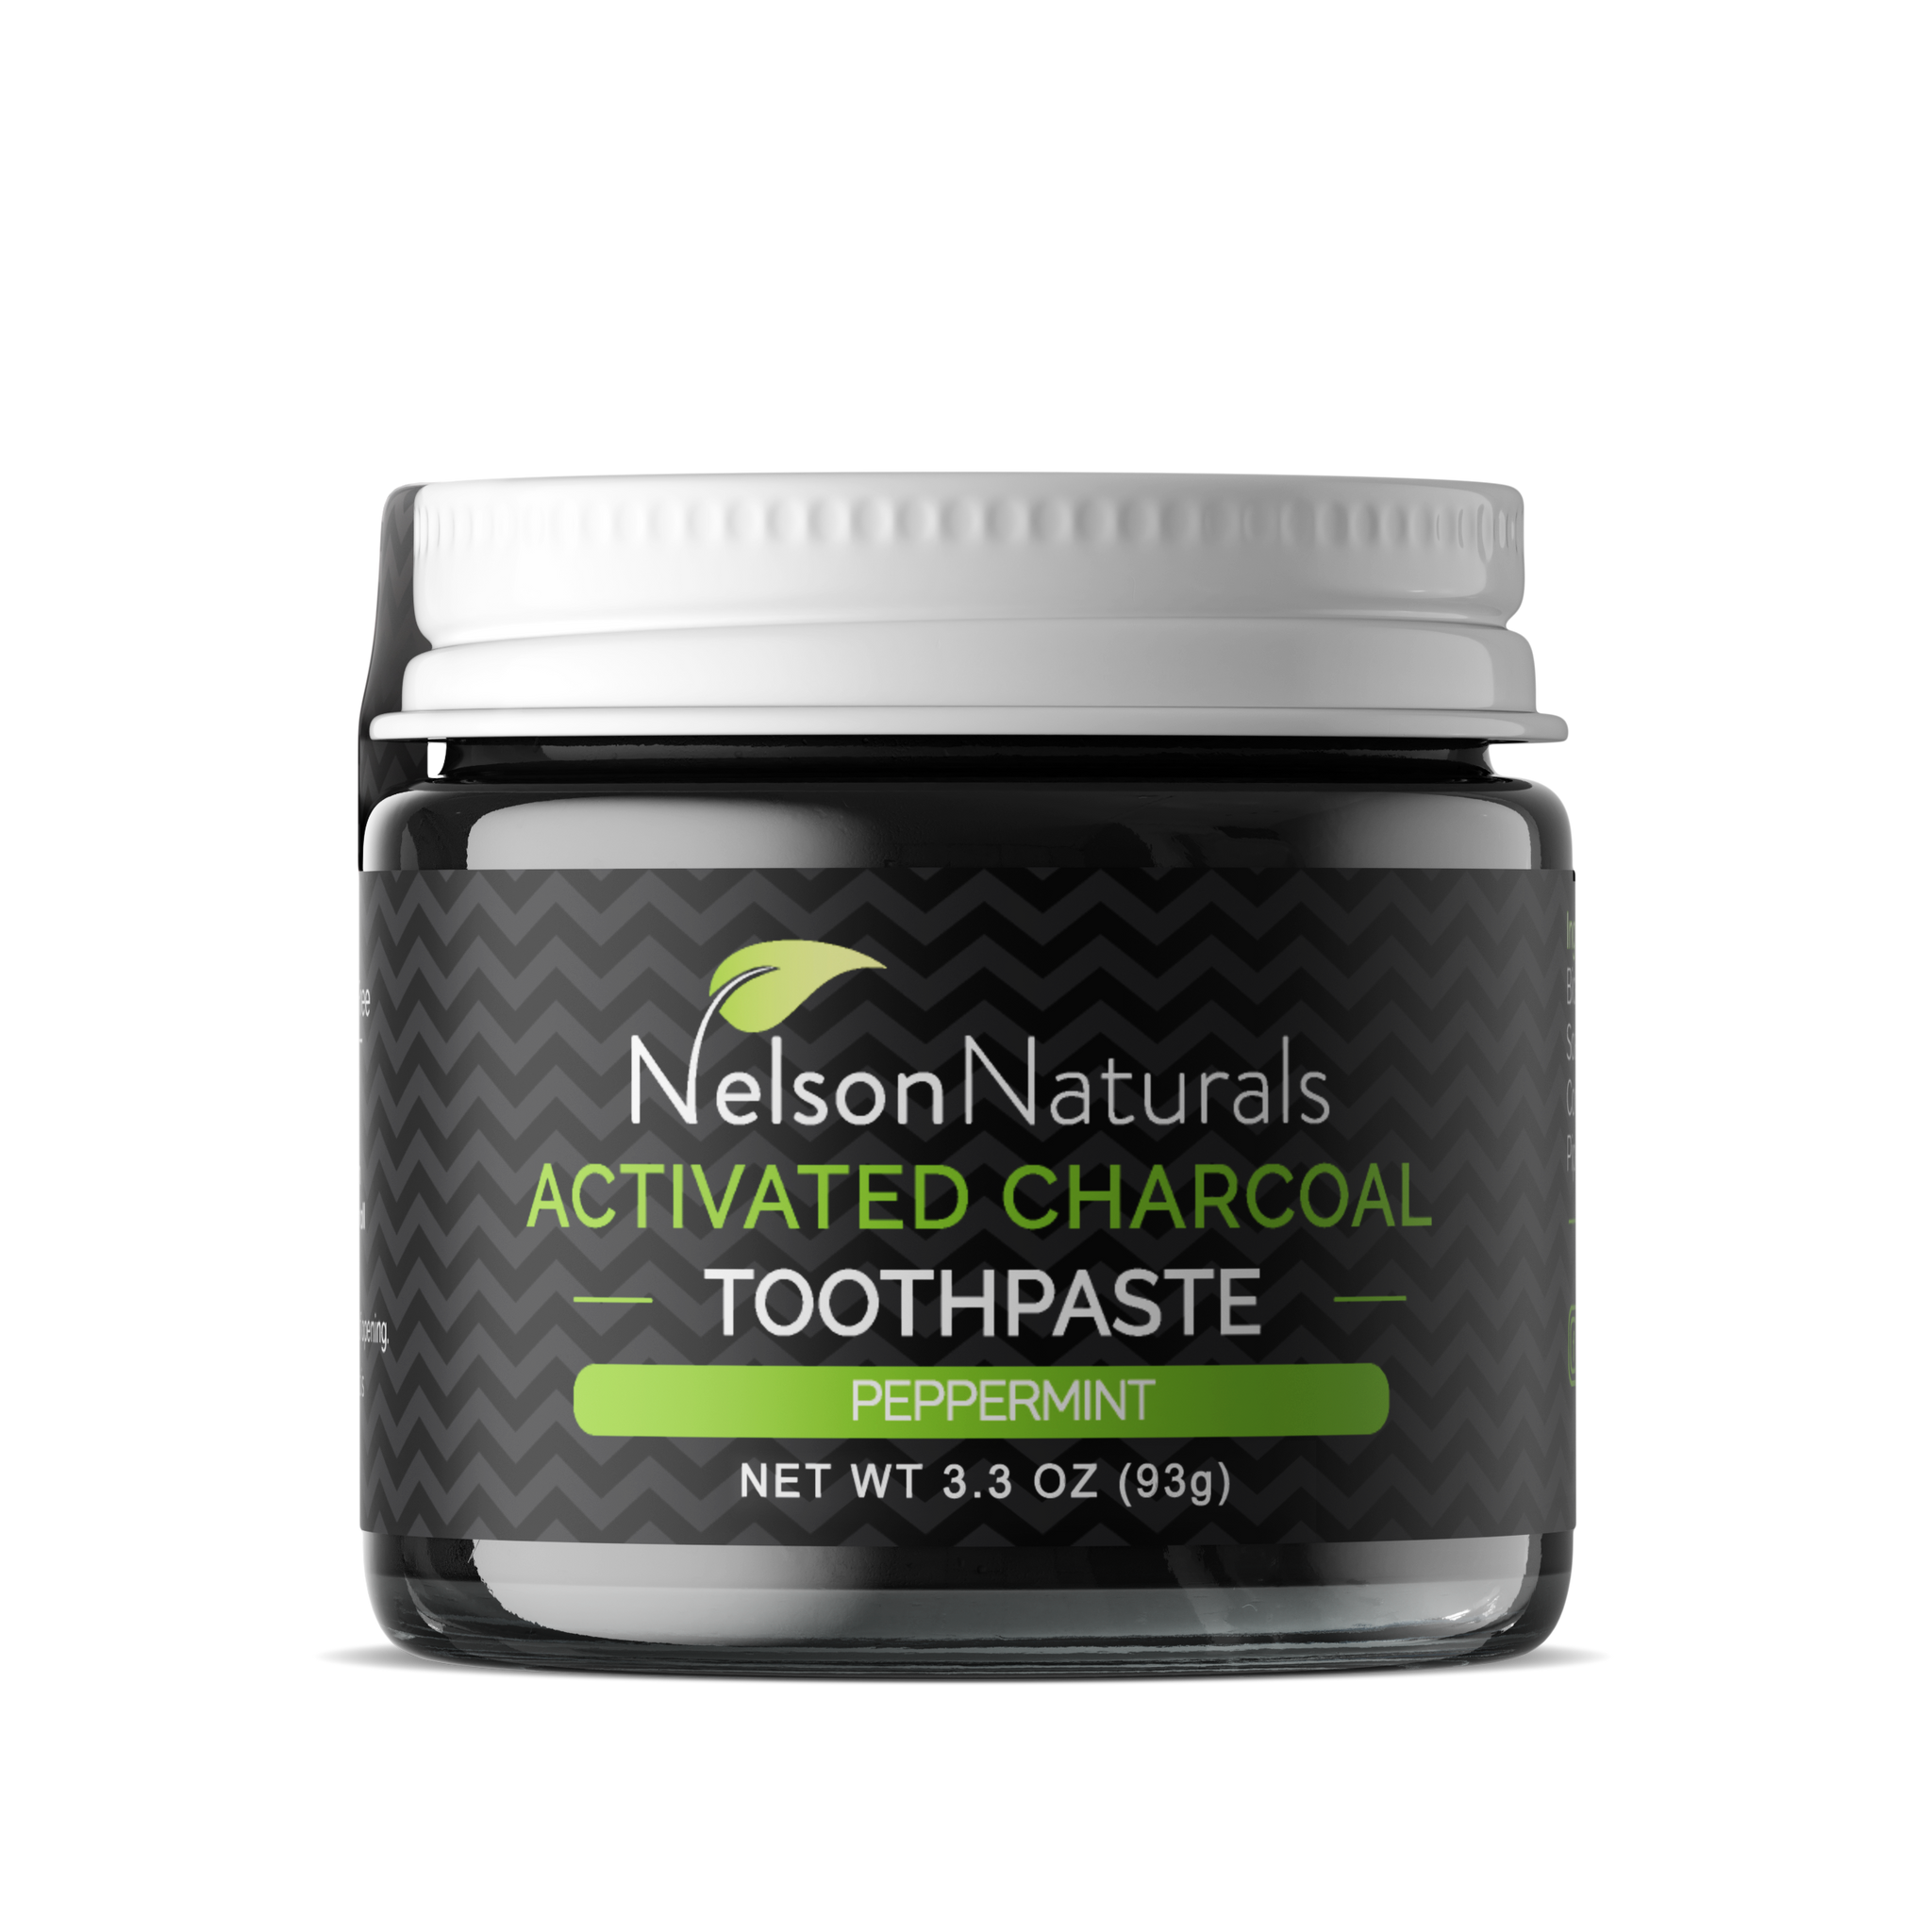 Nelson Naturals - Activated Charcoal Toothpaste - Peppermint